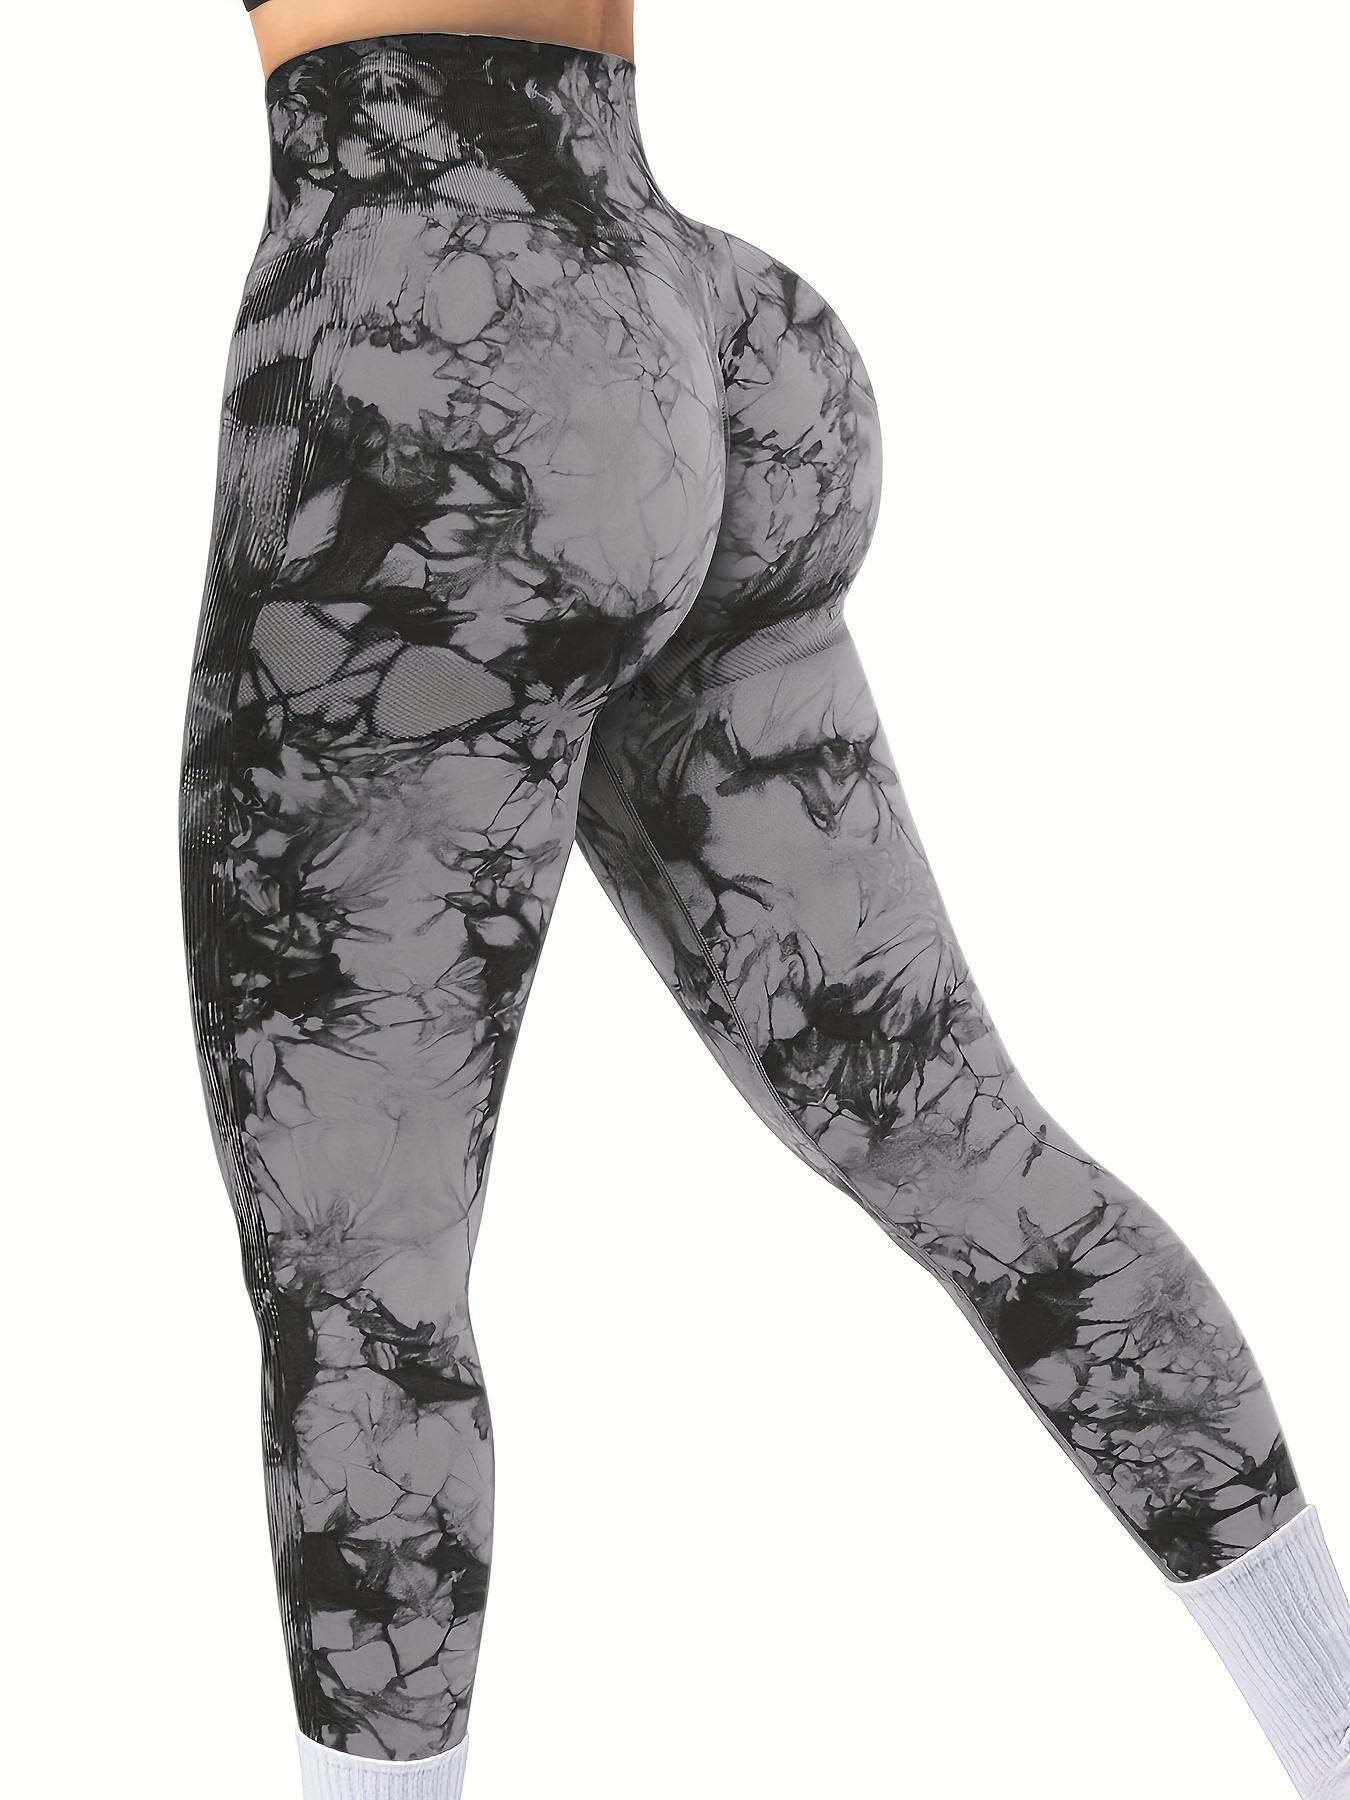 custers Night Workout Leggings for Women Seamless Scrunch Tights